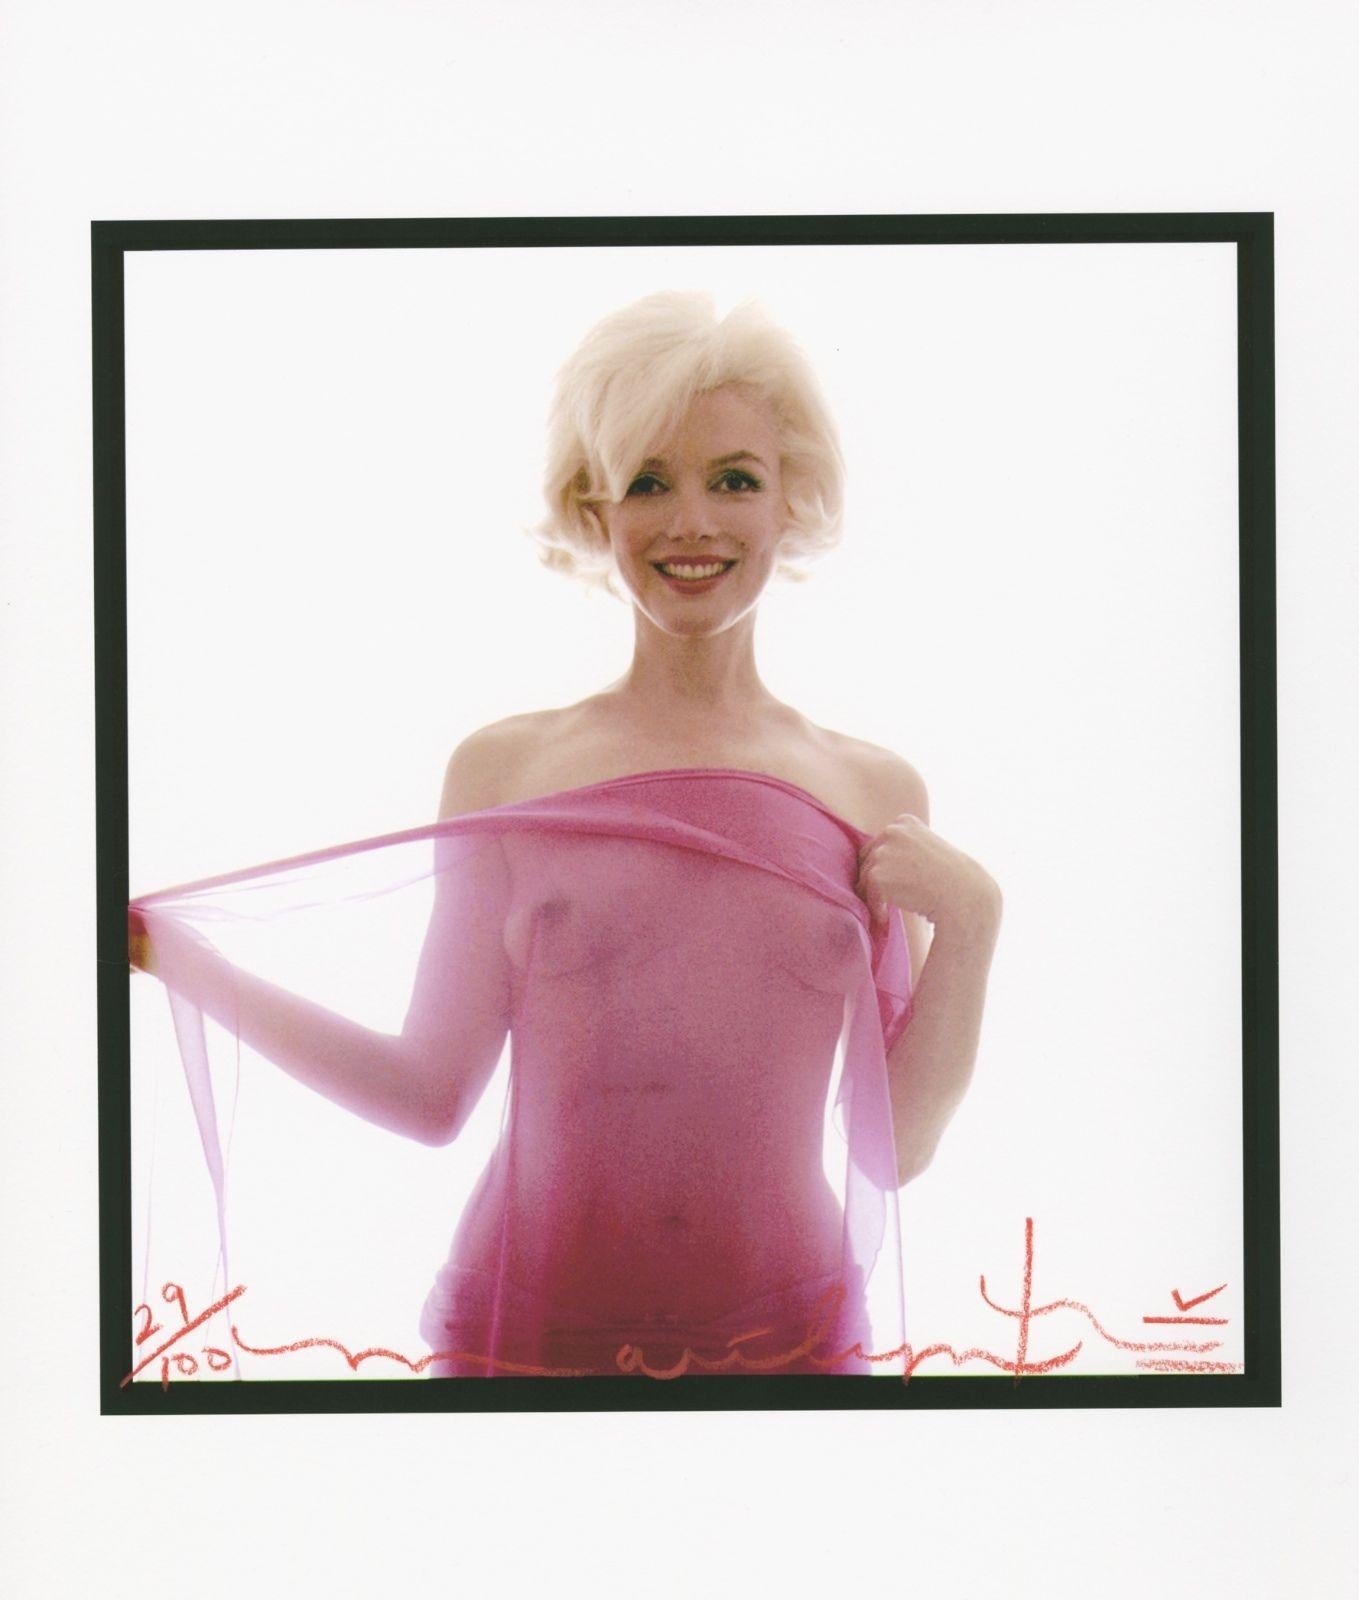 Bert stern
Marilyn Monroe nude in the fascia scarf
Mythical photo of the last session (1962)
inkjet printing by Bert Stern
2012
signed on both sides
certificate signed by the artist during his lifetime
edition of 100 copies